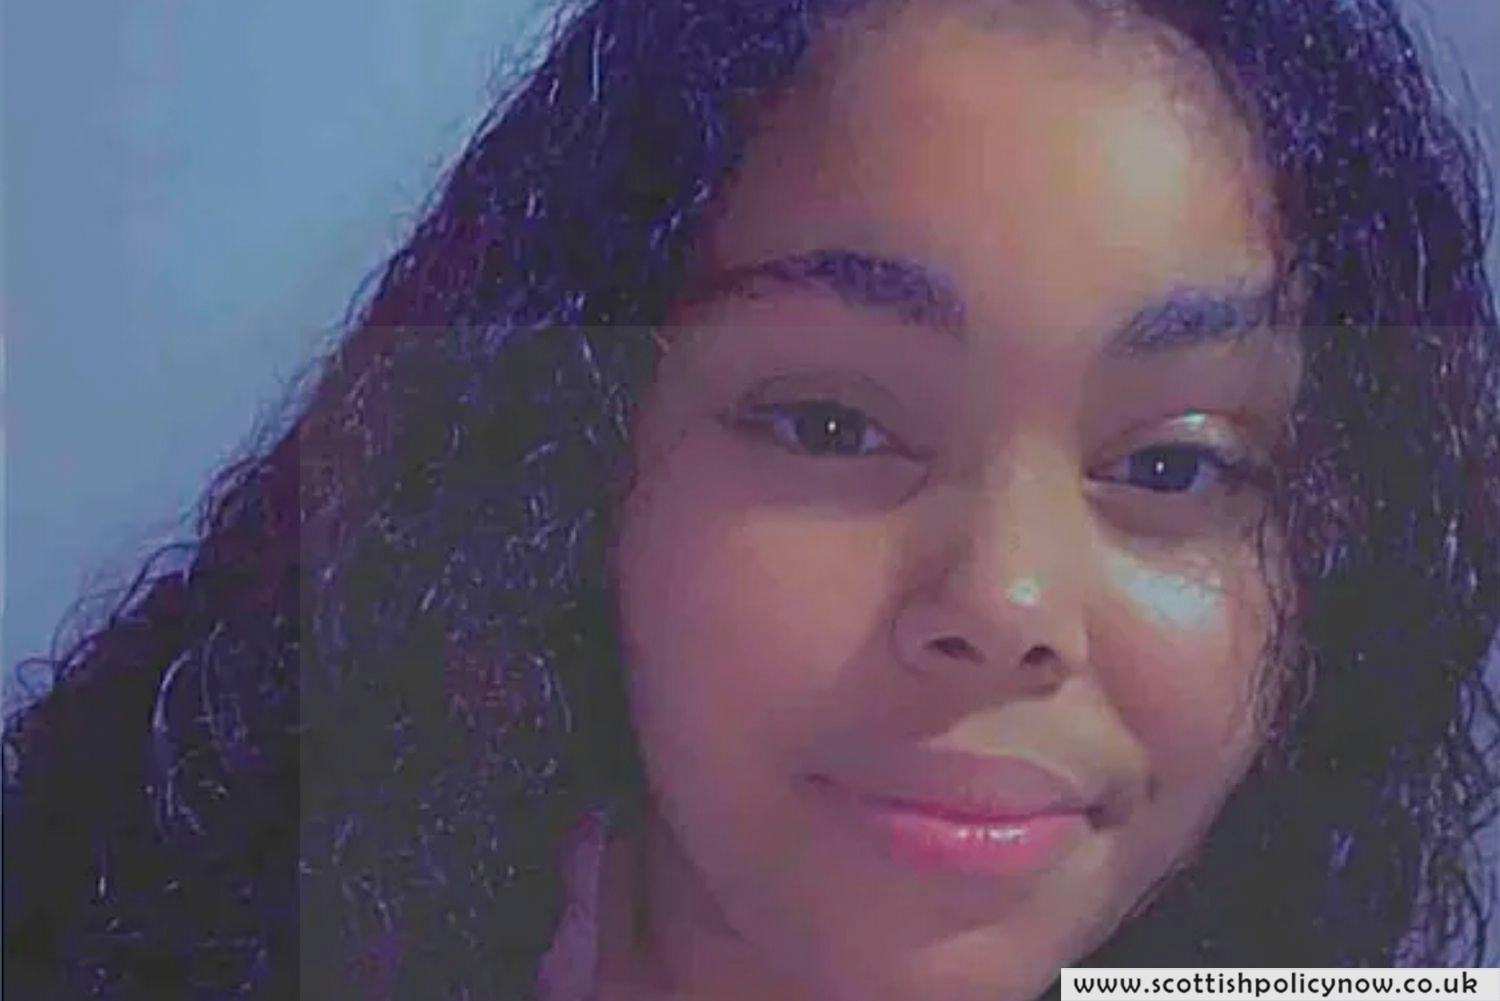 Louisiana Teen’s Dismembered Body Found in River, Man She Had Met Online Facing Murder Charges